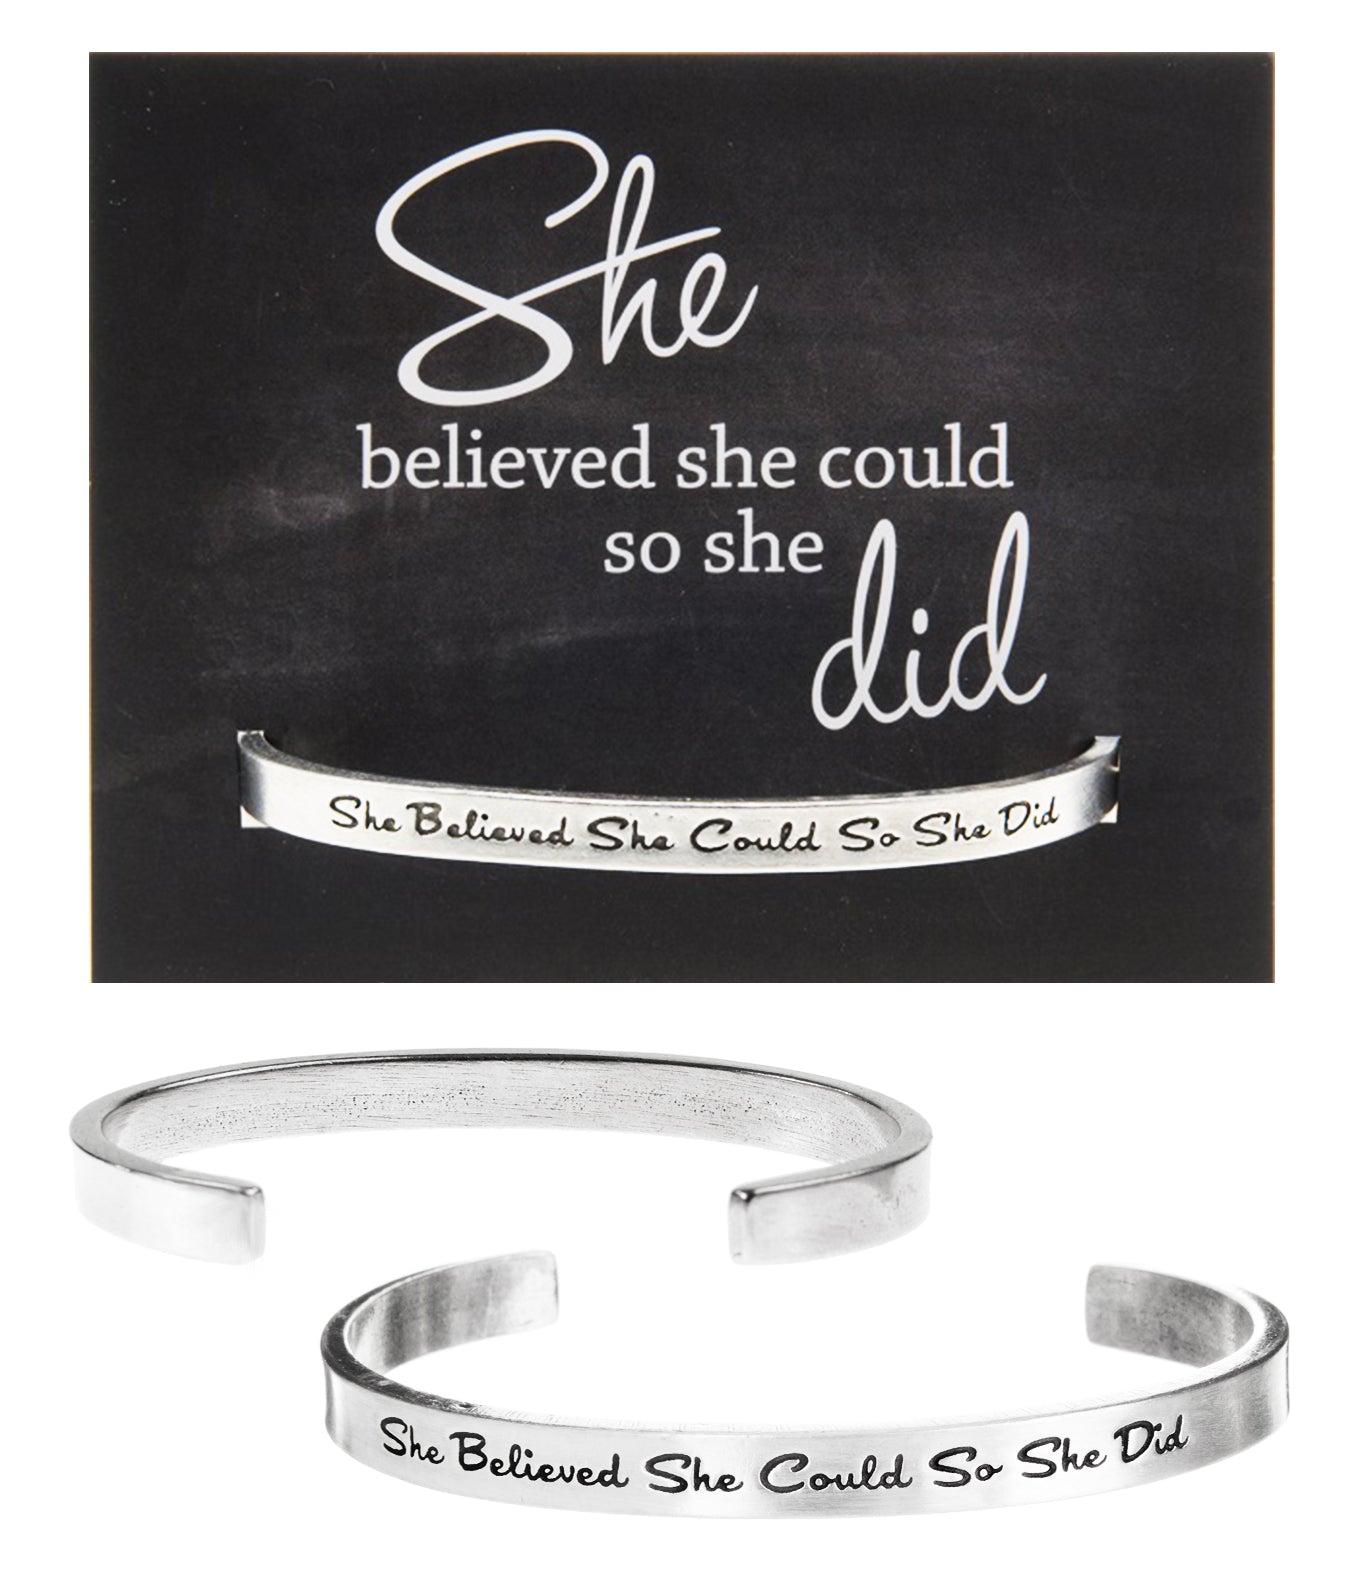 She Believed She Could, So She Did Quotable Cuff Bracelet with backer card